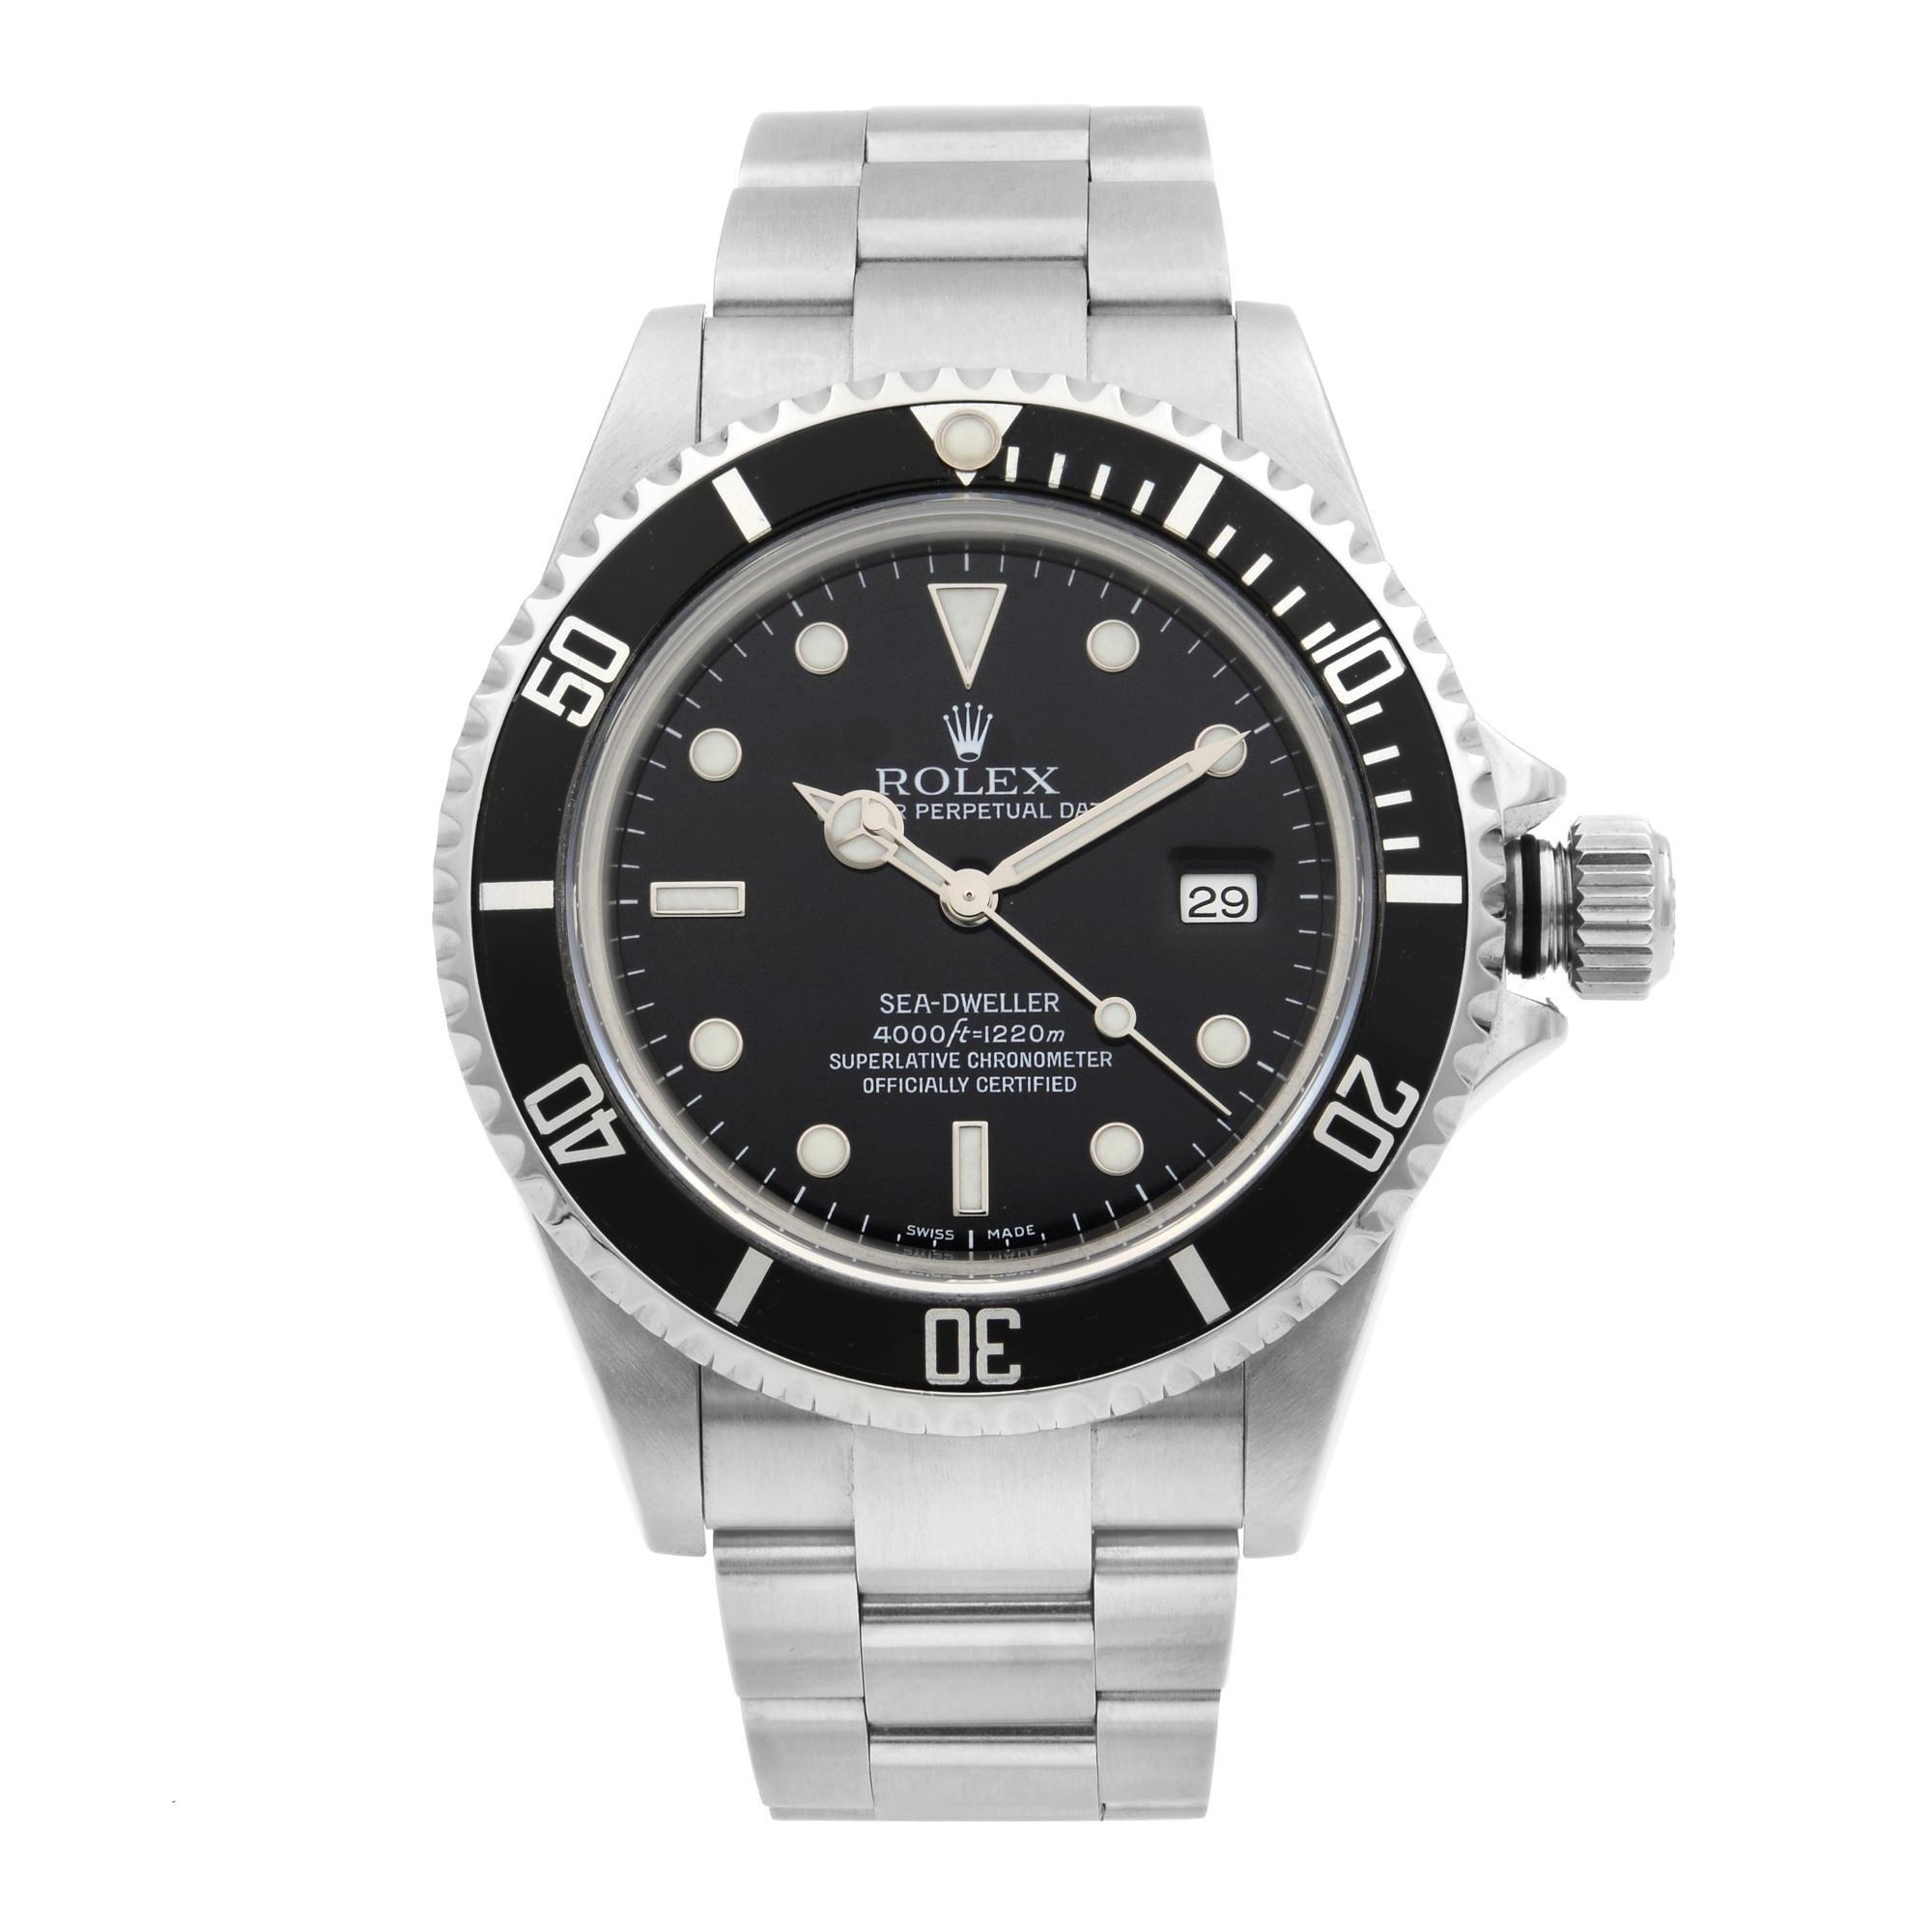 This pre-owned Rolex Sea-Dweller 16600 is a beautiful men's timepiece that is powered by a mechanical (automatic) movement which is cased in a stainless steel case. It has a round shape face, date indicator dial, and has hand sticks & dots style